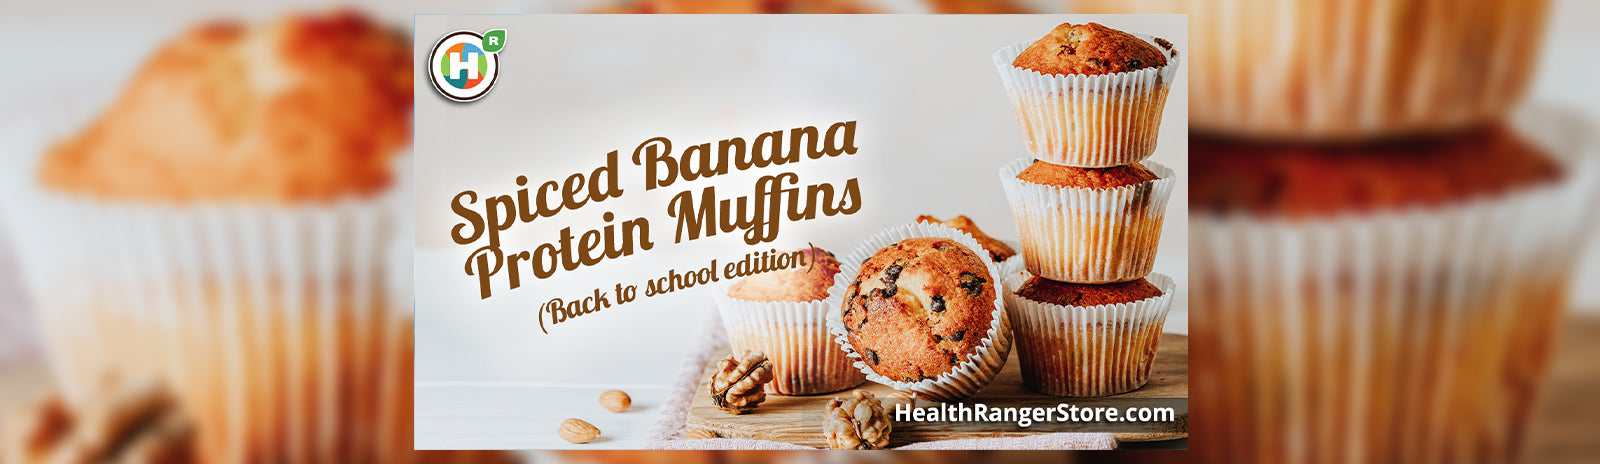 Spiced Banana Protein Muffins (Back to school edition)